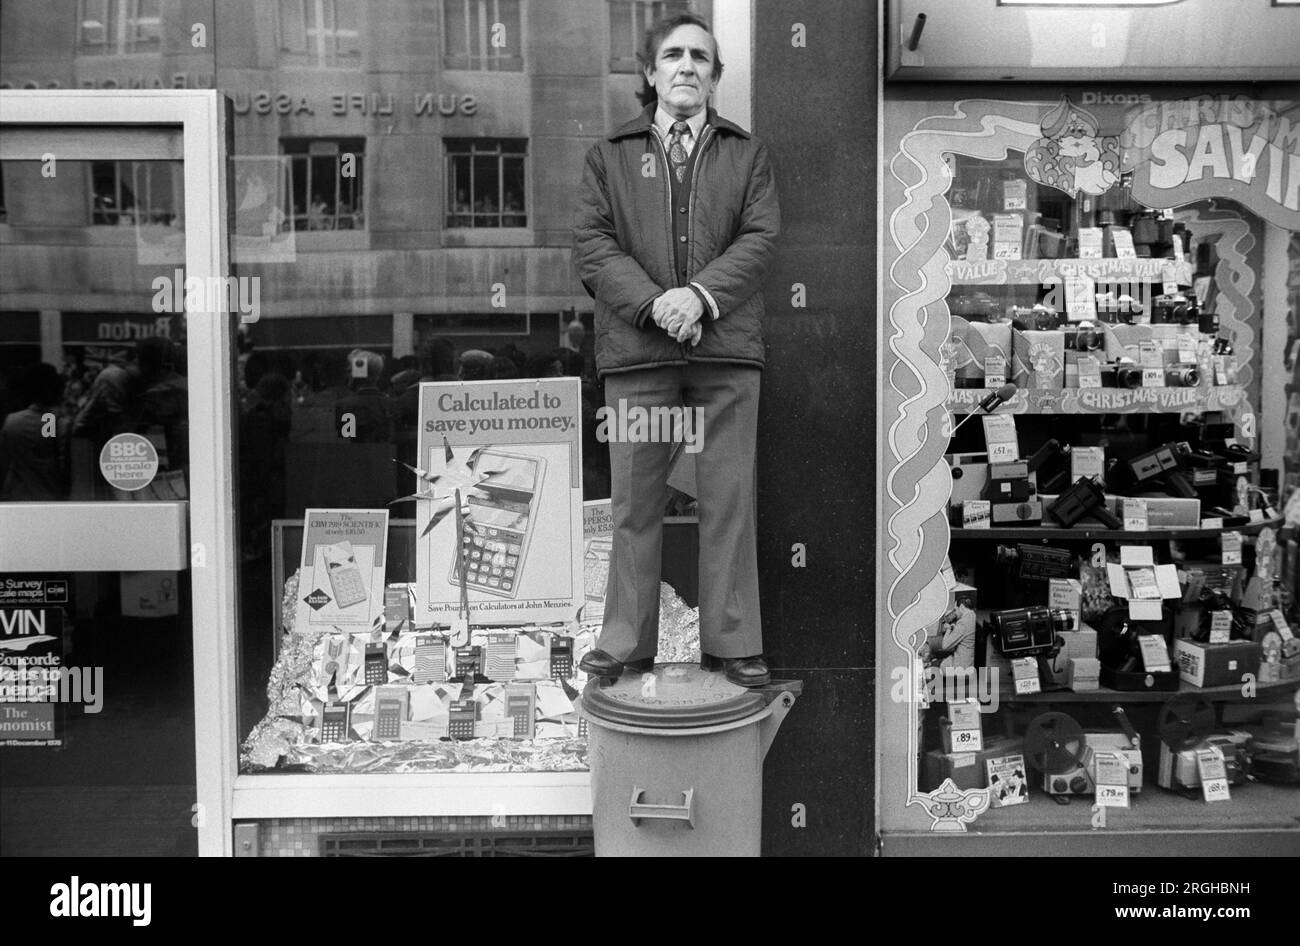 Lord Mayors Show 1970S. The annual parade through the City of London.A man stands on  a dustbin outside a shop to get a better view looking over the heads of crowds of people. England 1970s  1976. HOMER SYKES Stock Photo